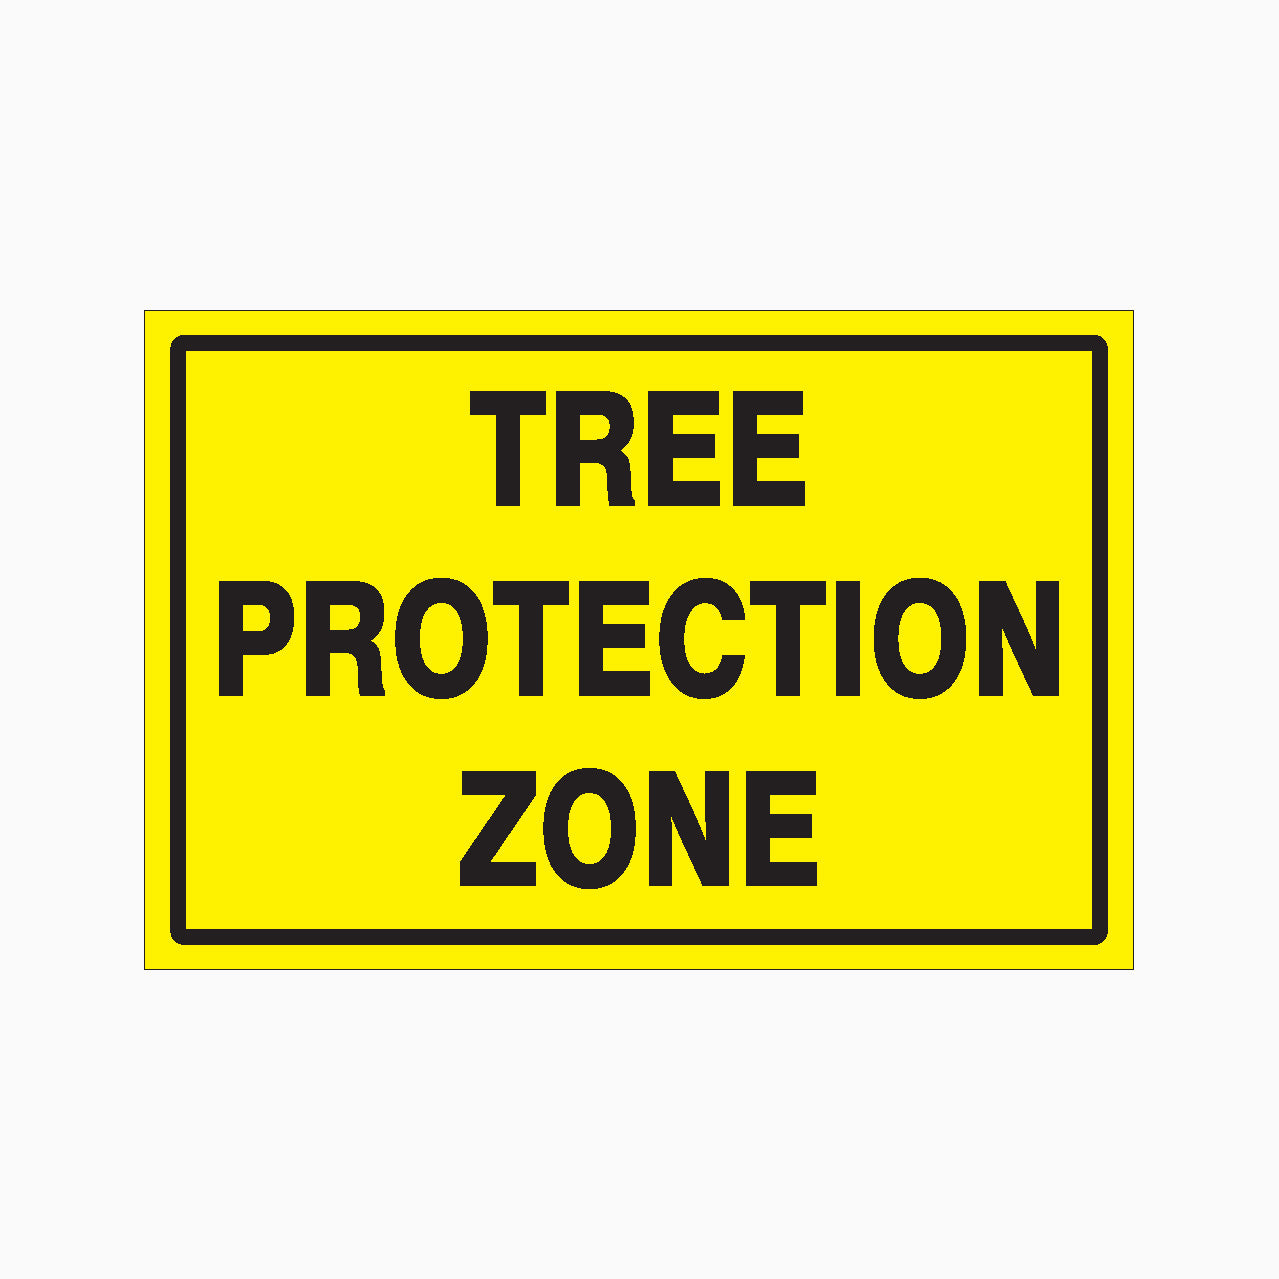 TREE PROTECTION ZONE SIGN - GET SIGNS